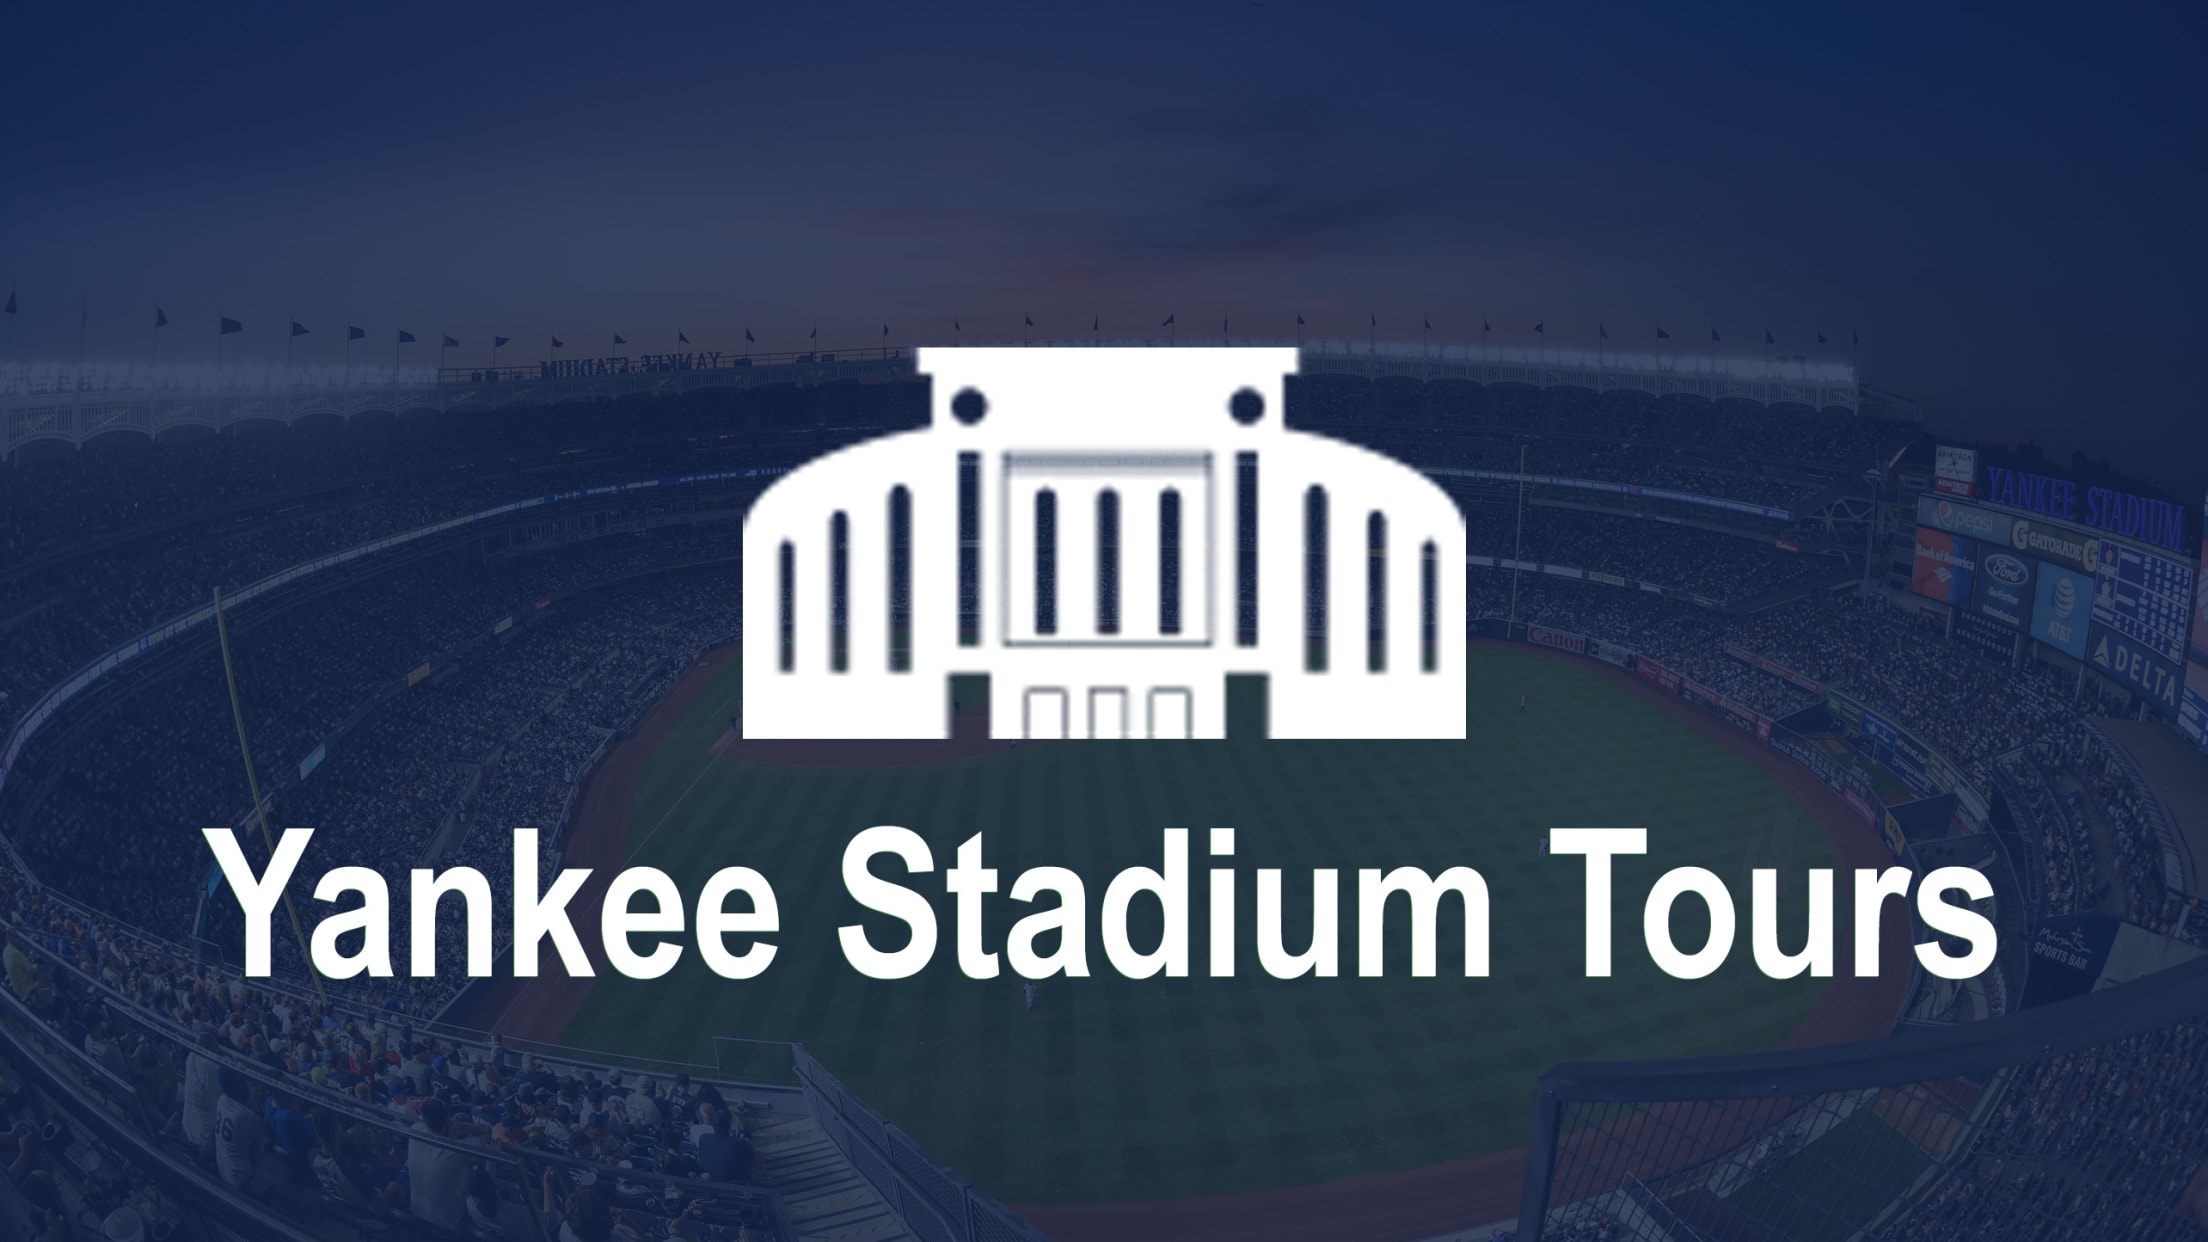 Yankee Stadium Tour Review: Exploring an Iconic NYC Landmark - New York  City Article - Citiview Travel Guide